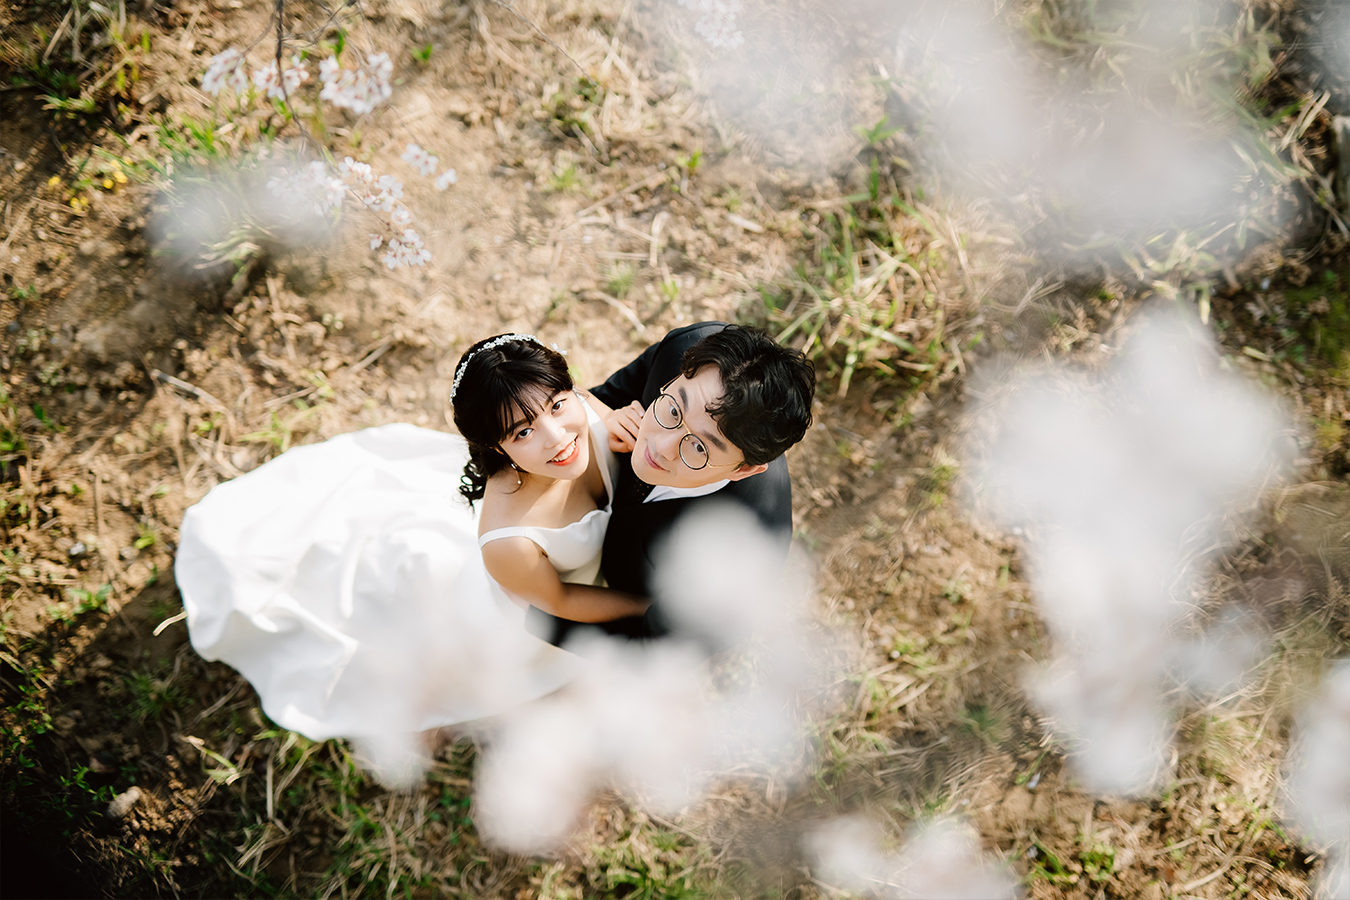 Cute Korea Pre-Wedding Photoshoot Under the Cherry Blossoms Trees by Jungyeol on OneThreeOneFour 7